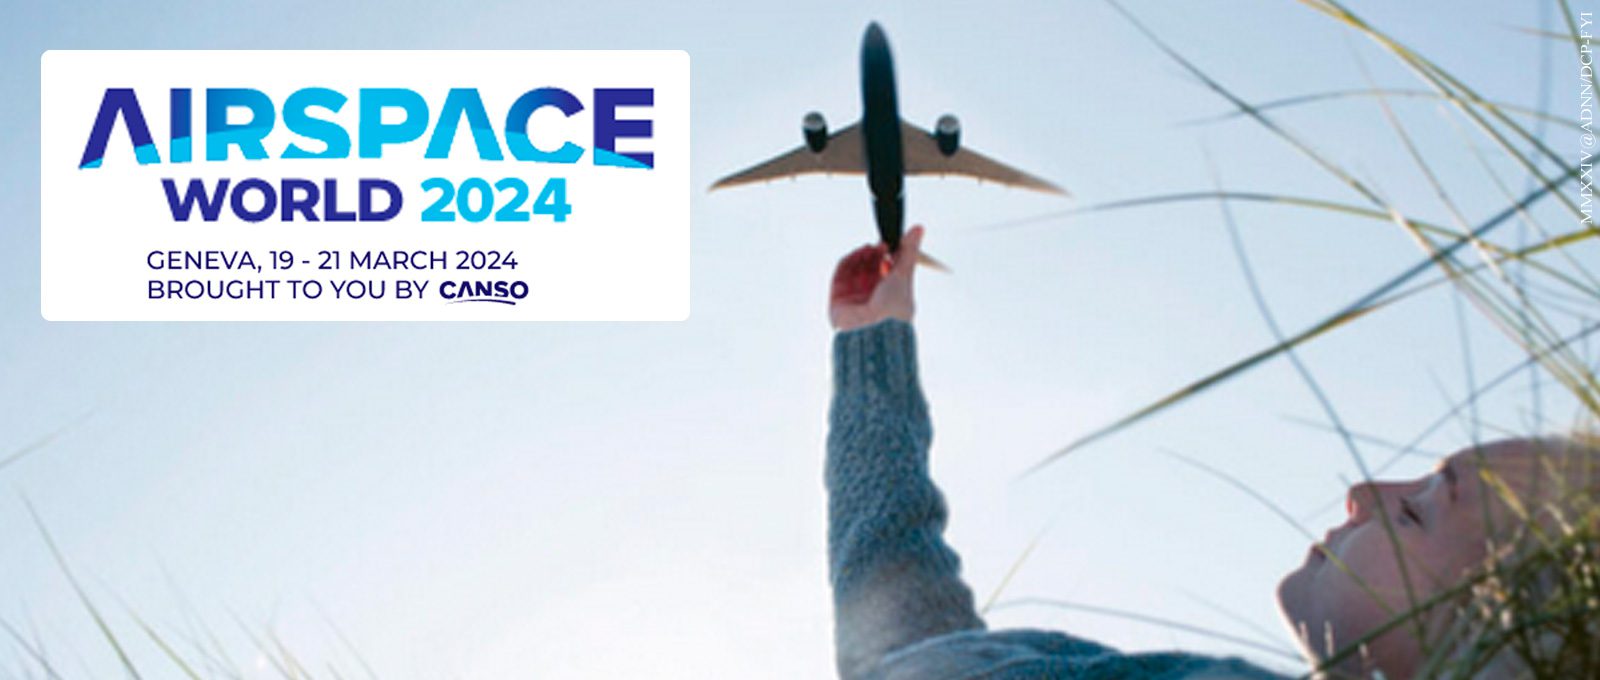 Atech, an Embraer Group company, will present its latest innovations in airspace management and control at Airspace World 2024